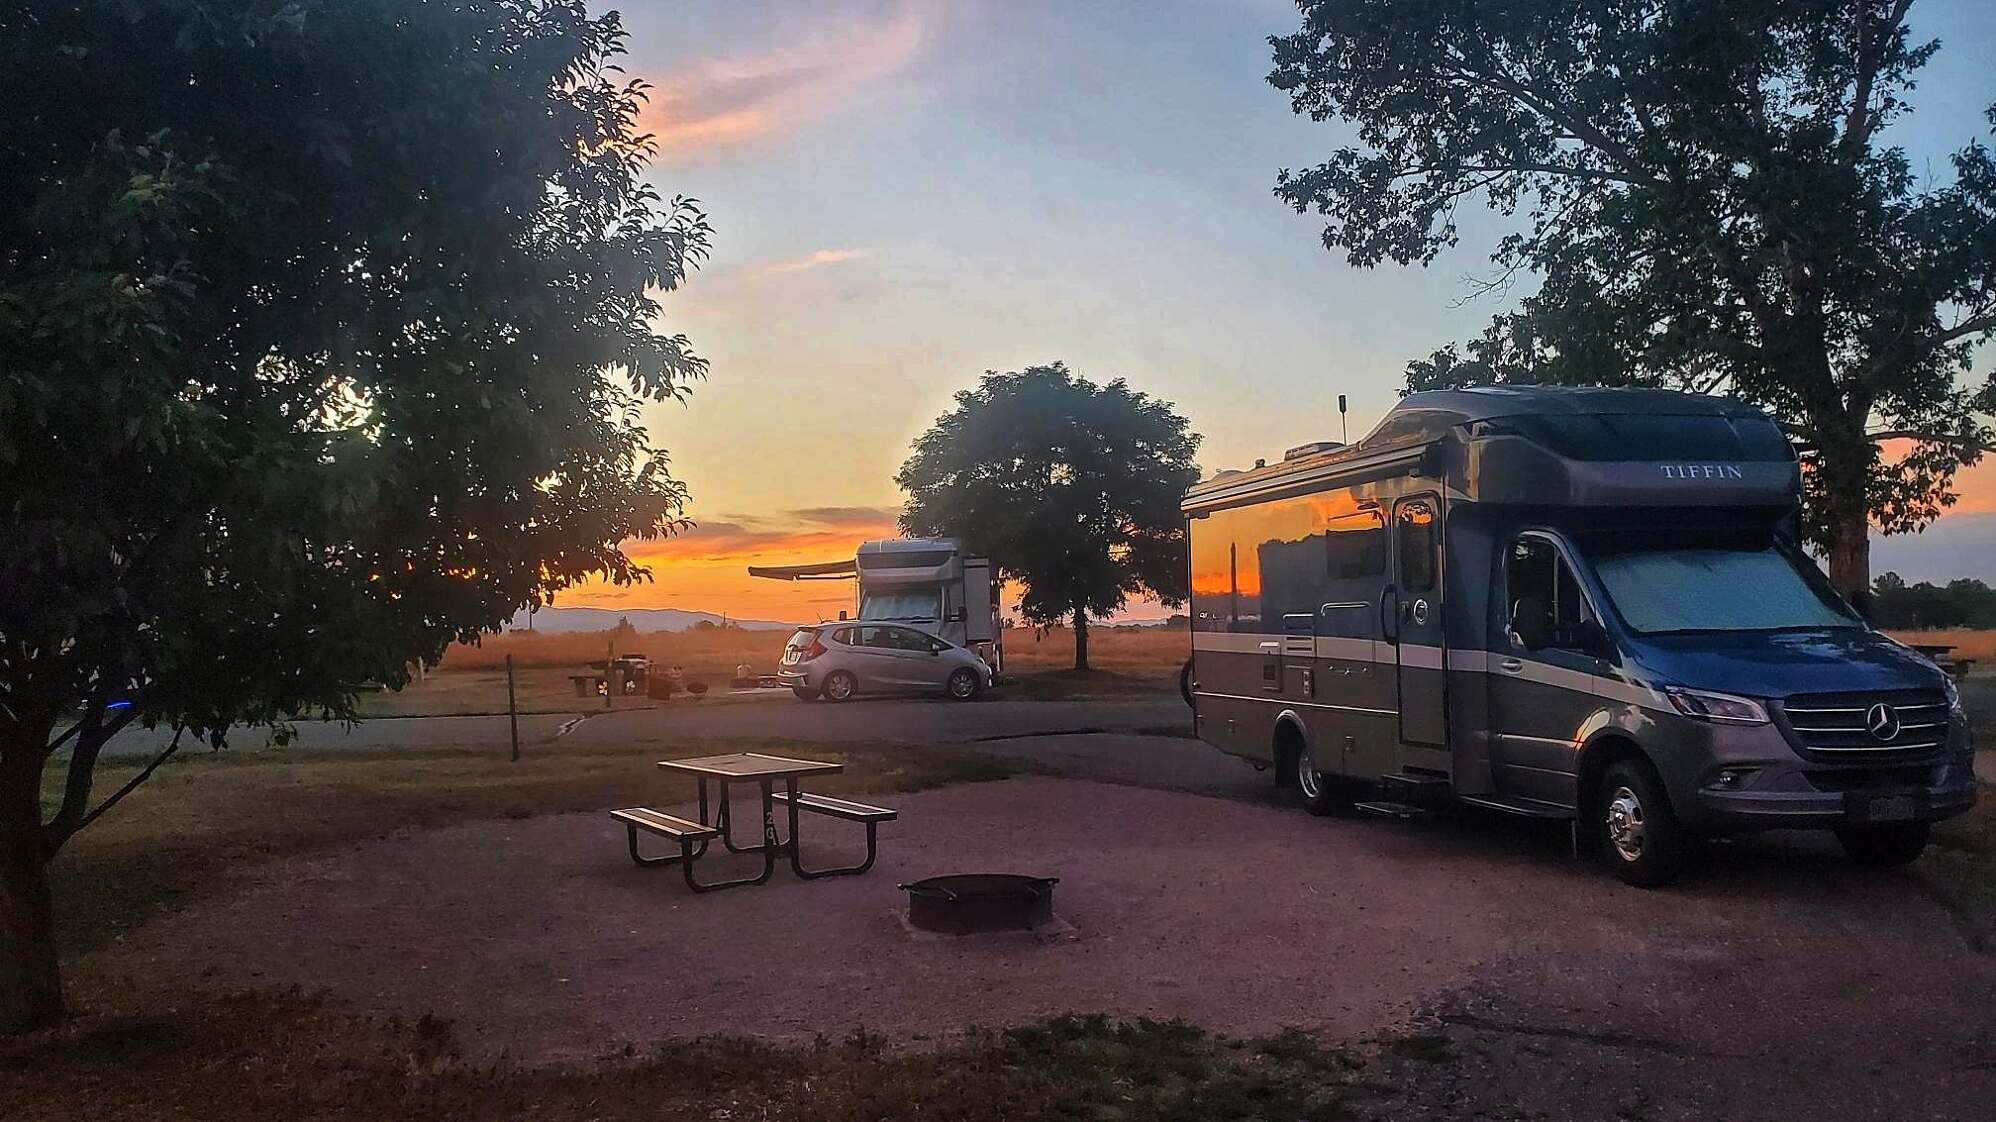 Safety Tips For Your Next RV Trip